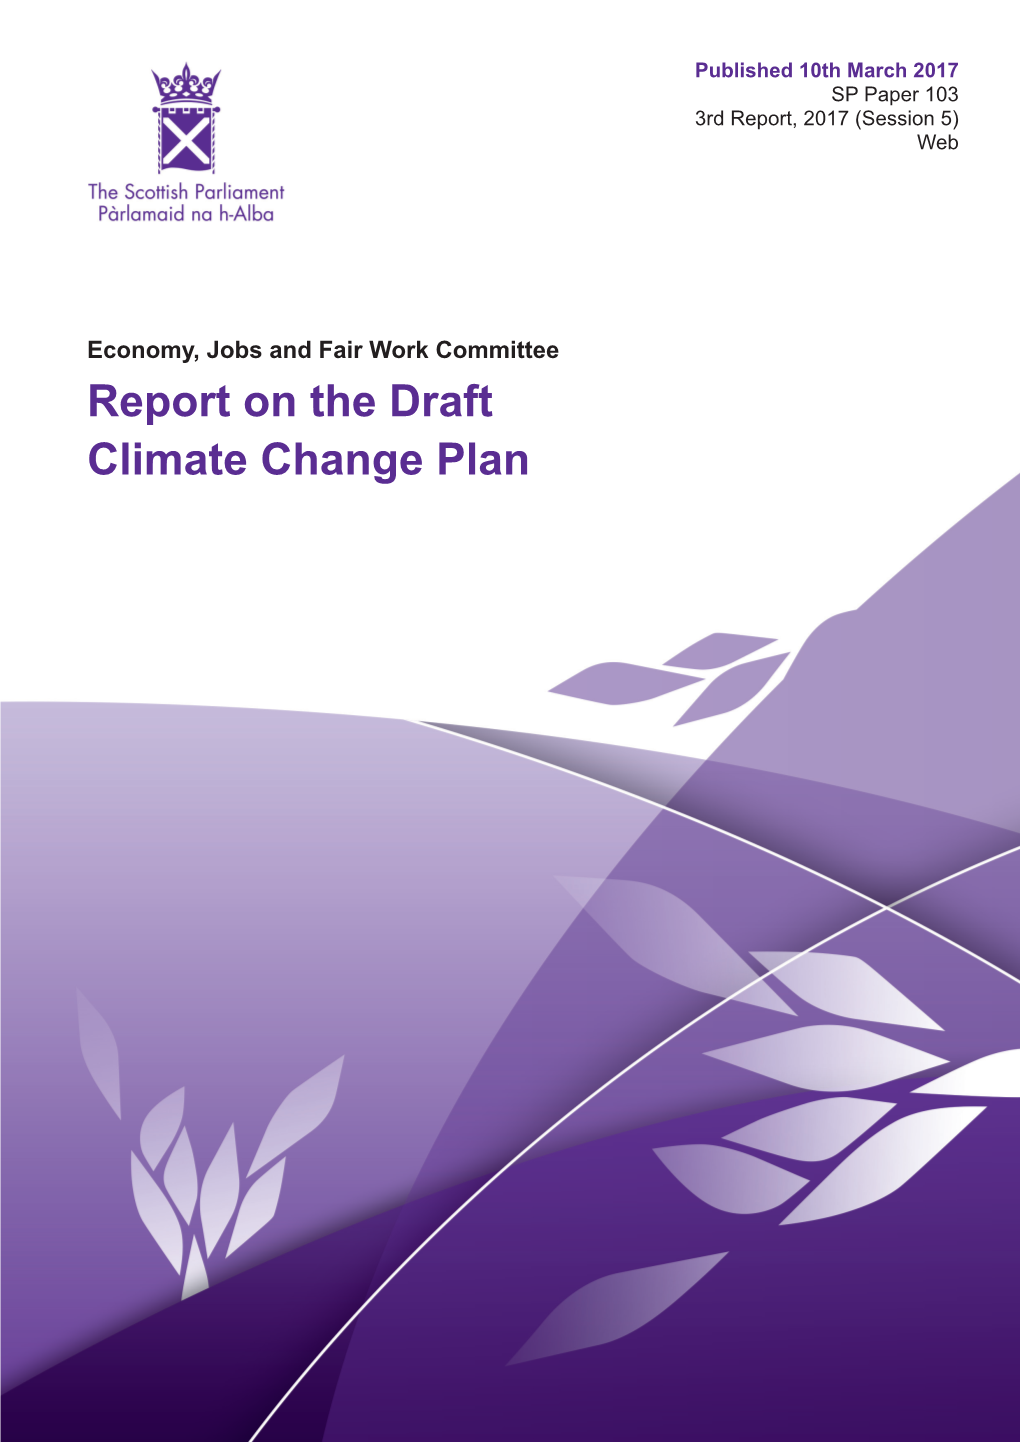 Economy, Jobs and Fair Work Committee Report on the Draft Climate Change Plan